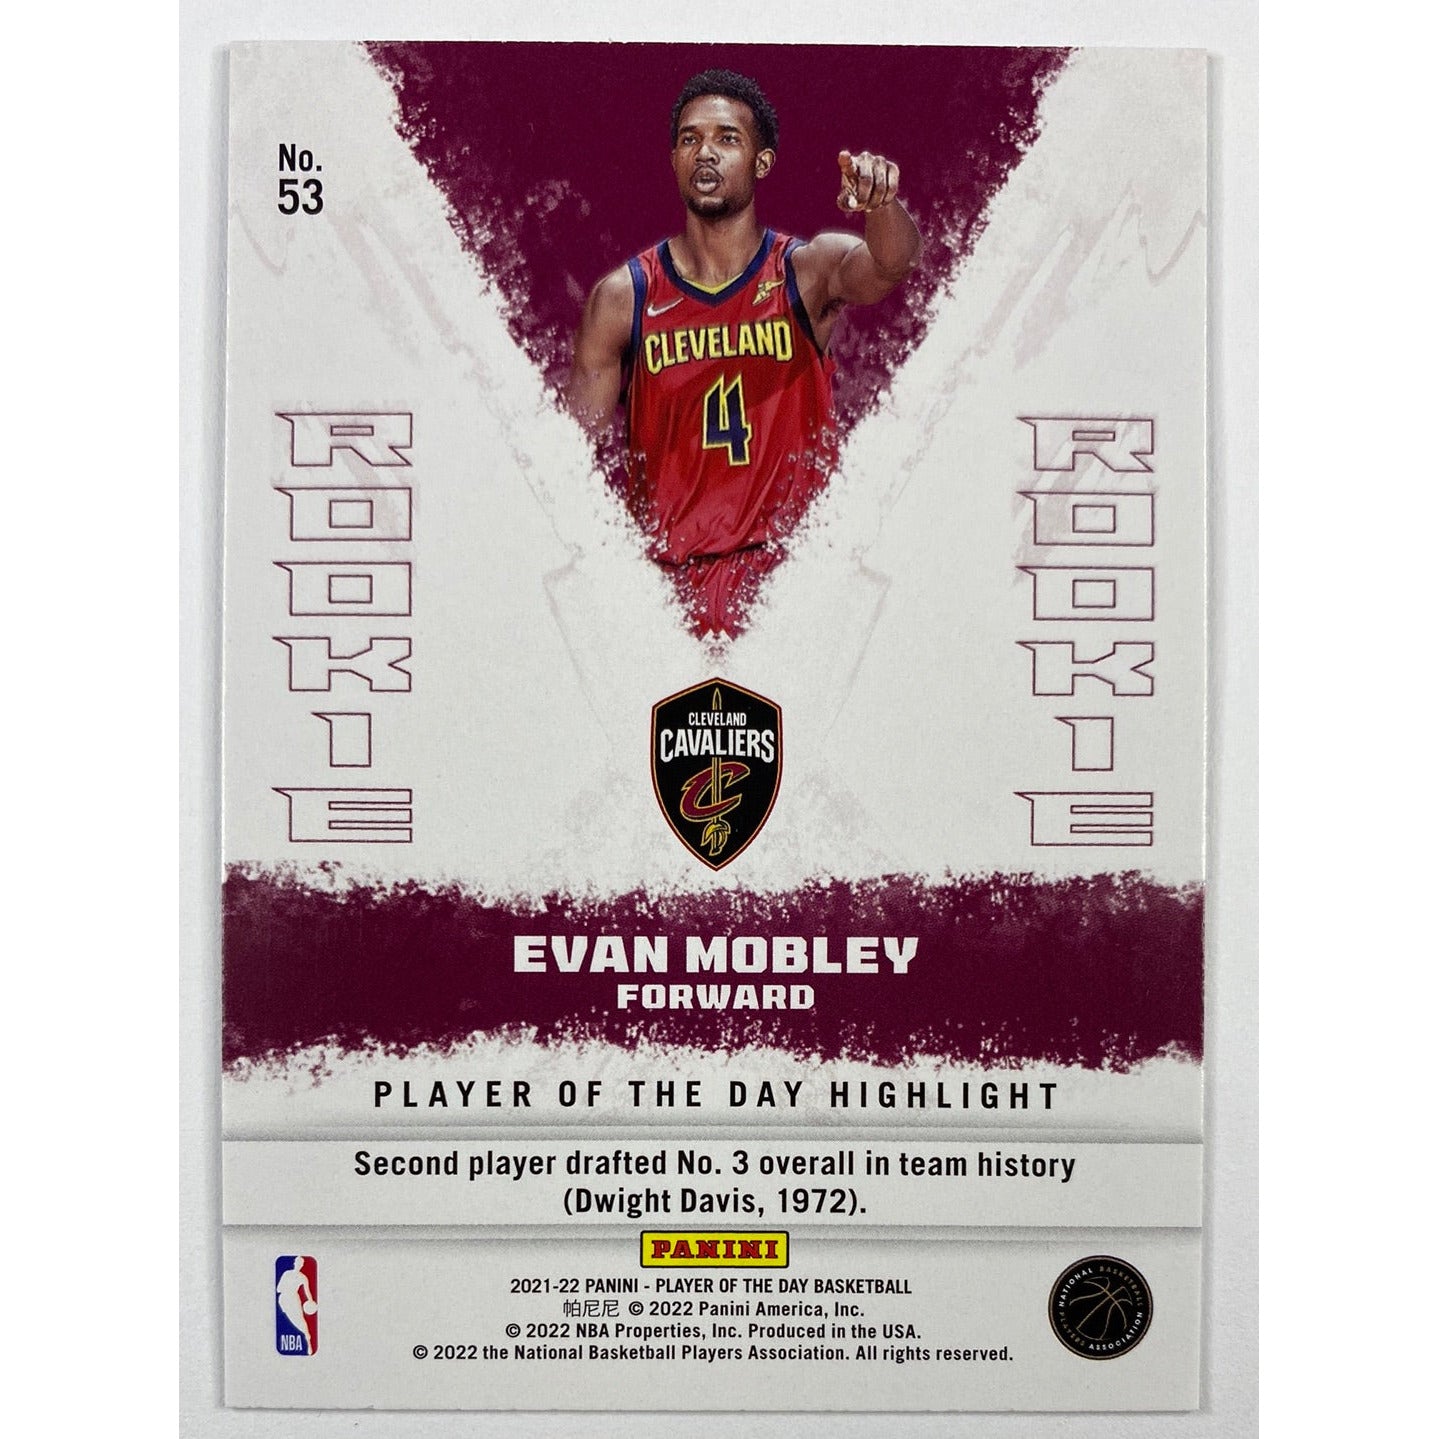 2021-22 Player of the Day Evan Mobley Player of the Day Highlight Rookie